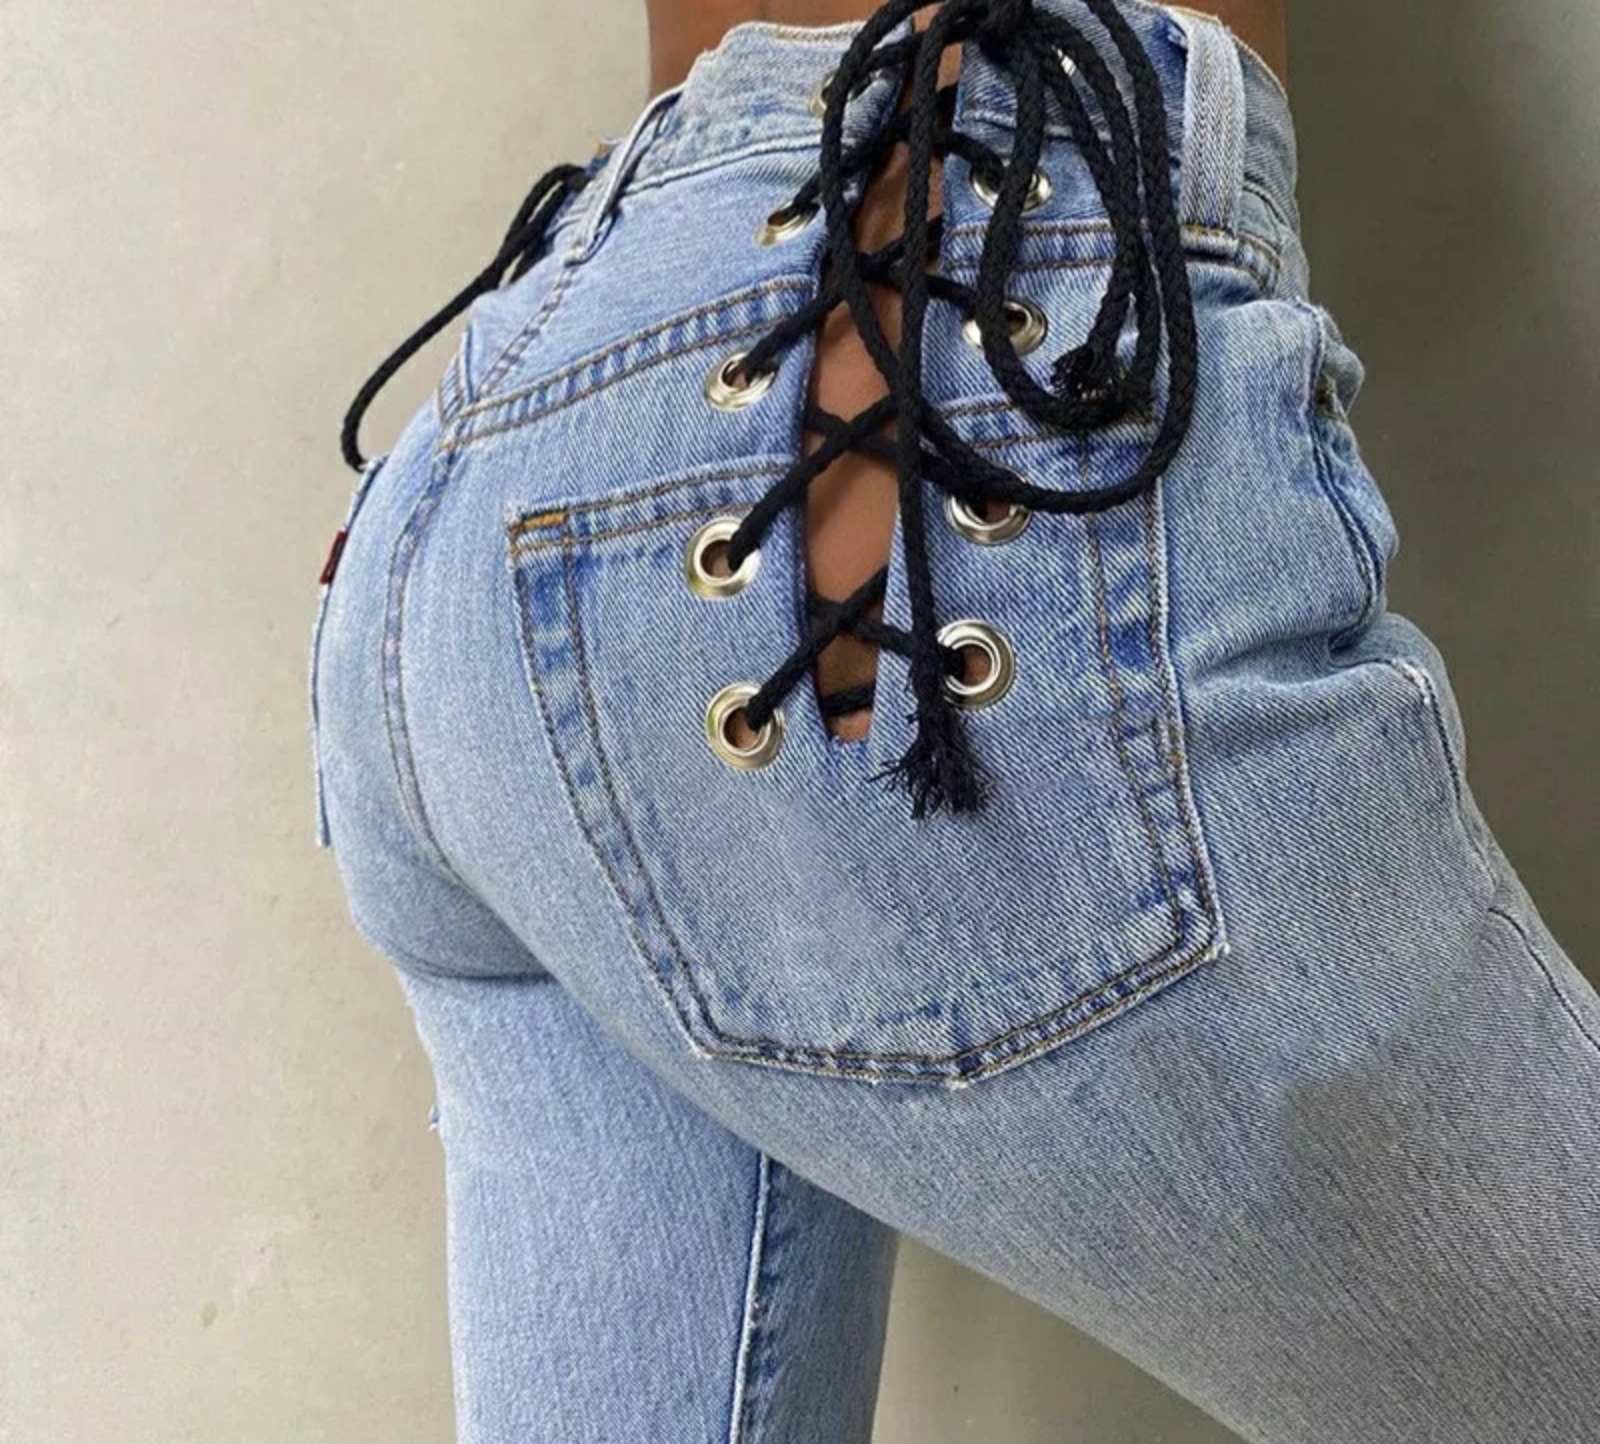 Duo Lace Up Rear Jeans – Outfit Made